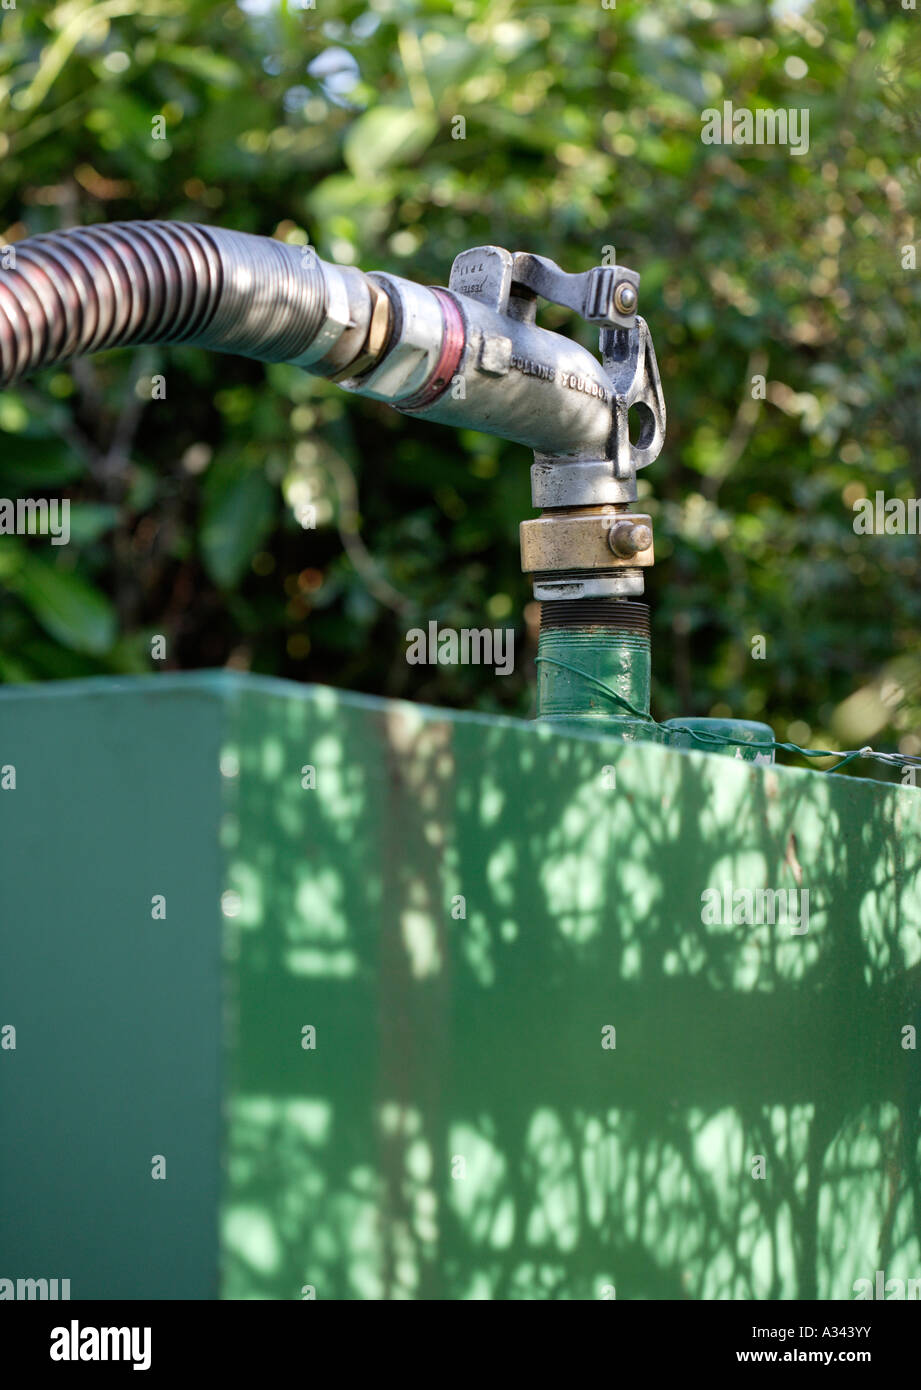 Household heating oil tank being filled by pump Stock Photo